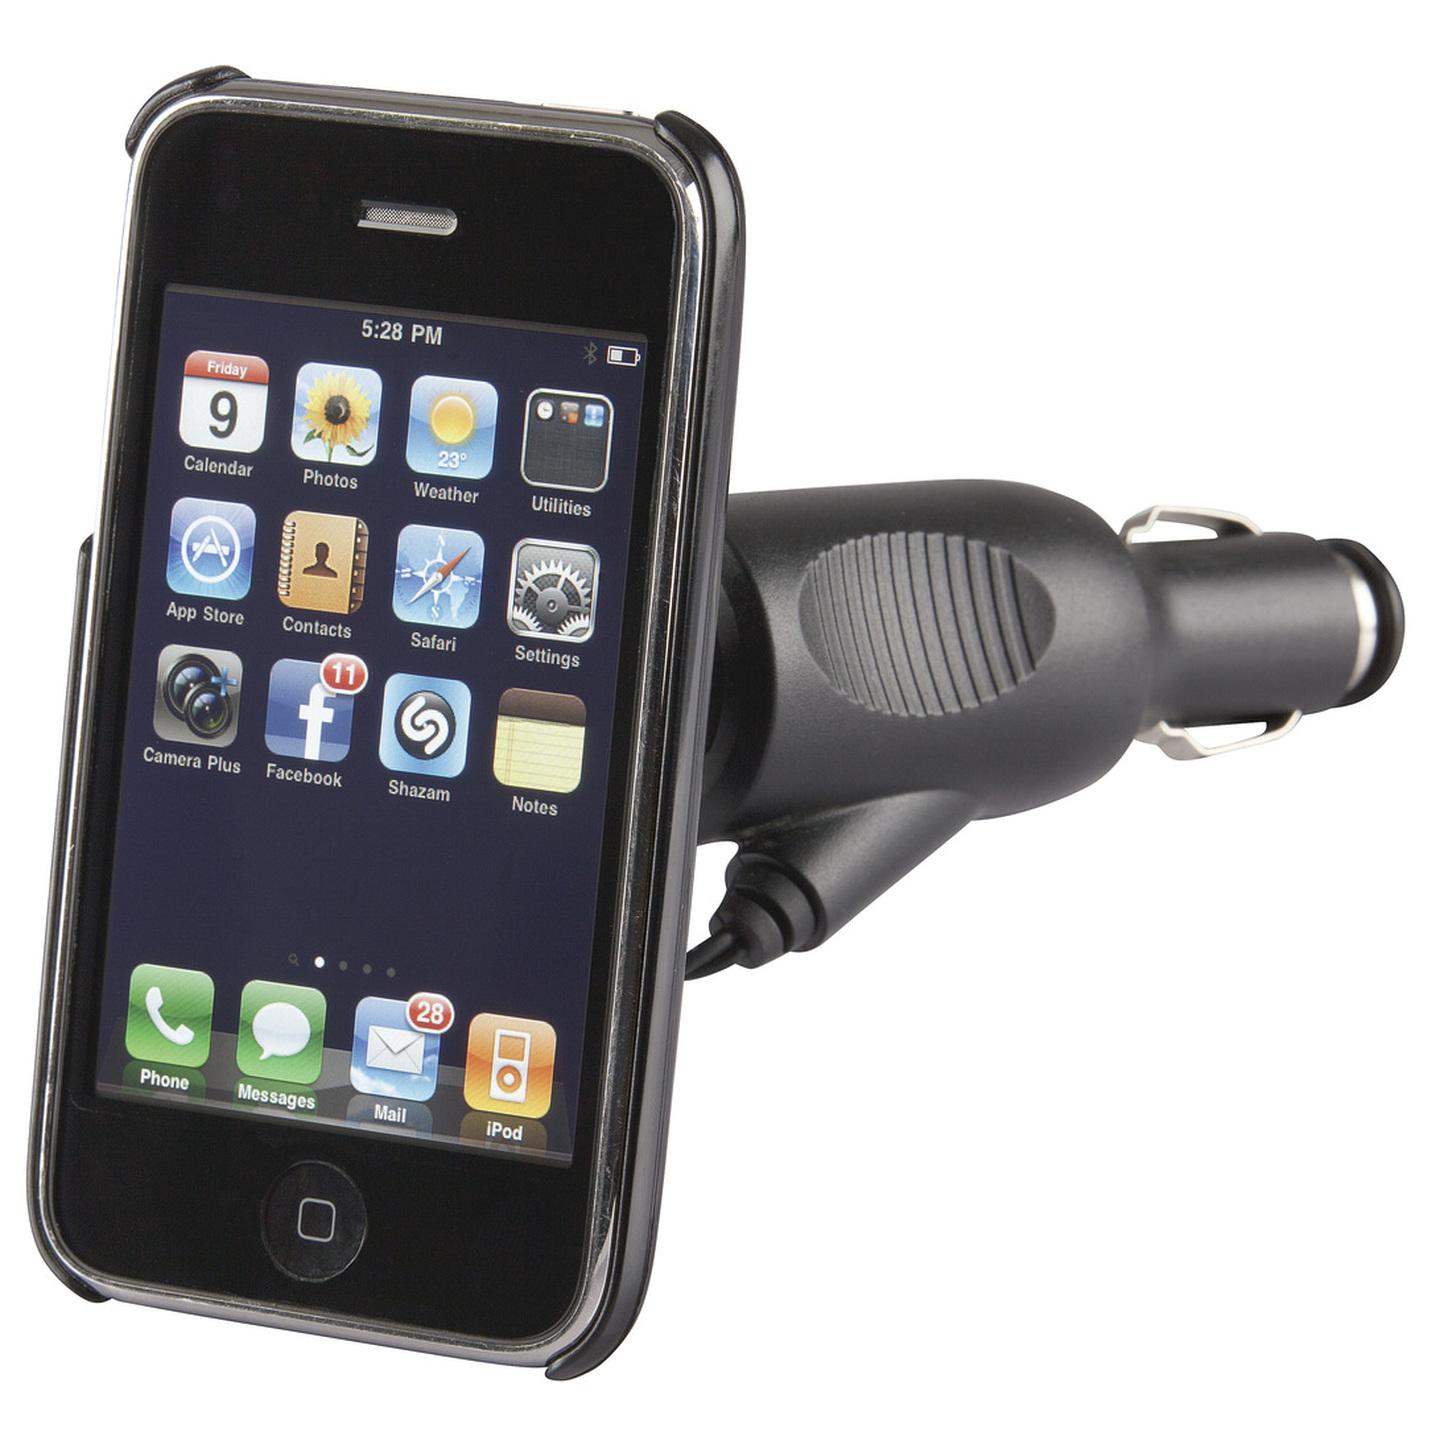 12VDC Charger Cradle for iPhone 3G/3GS/4/4S